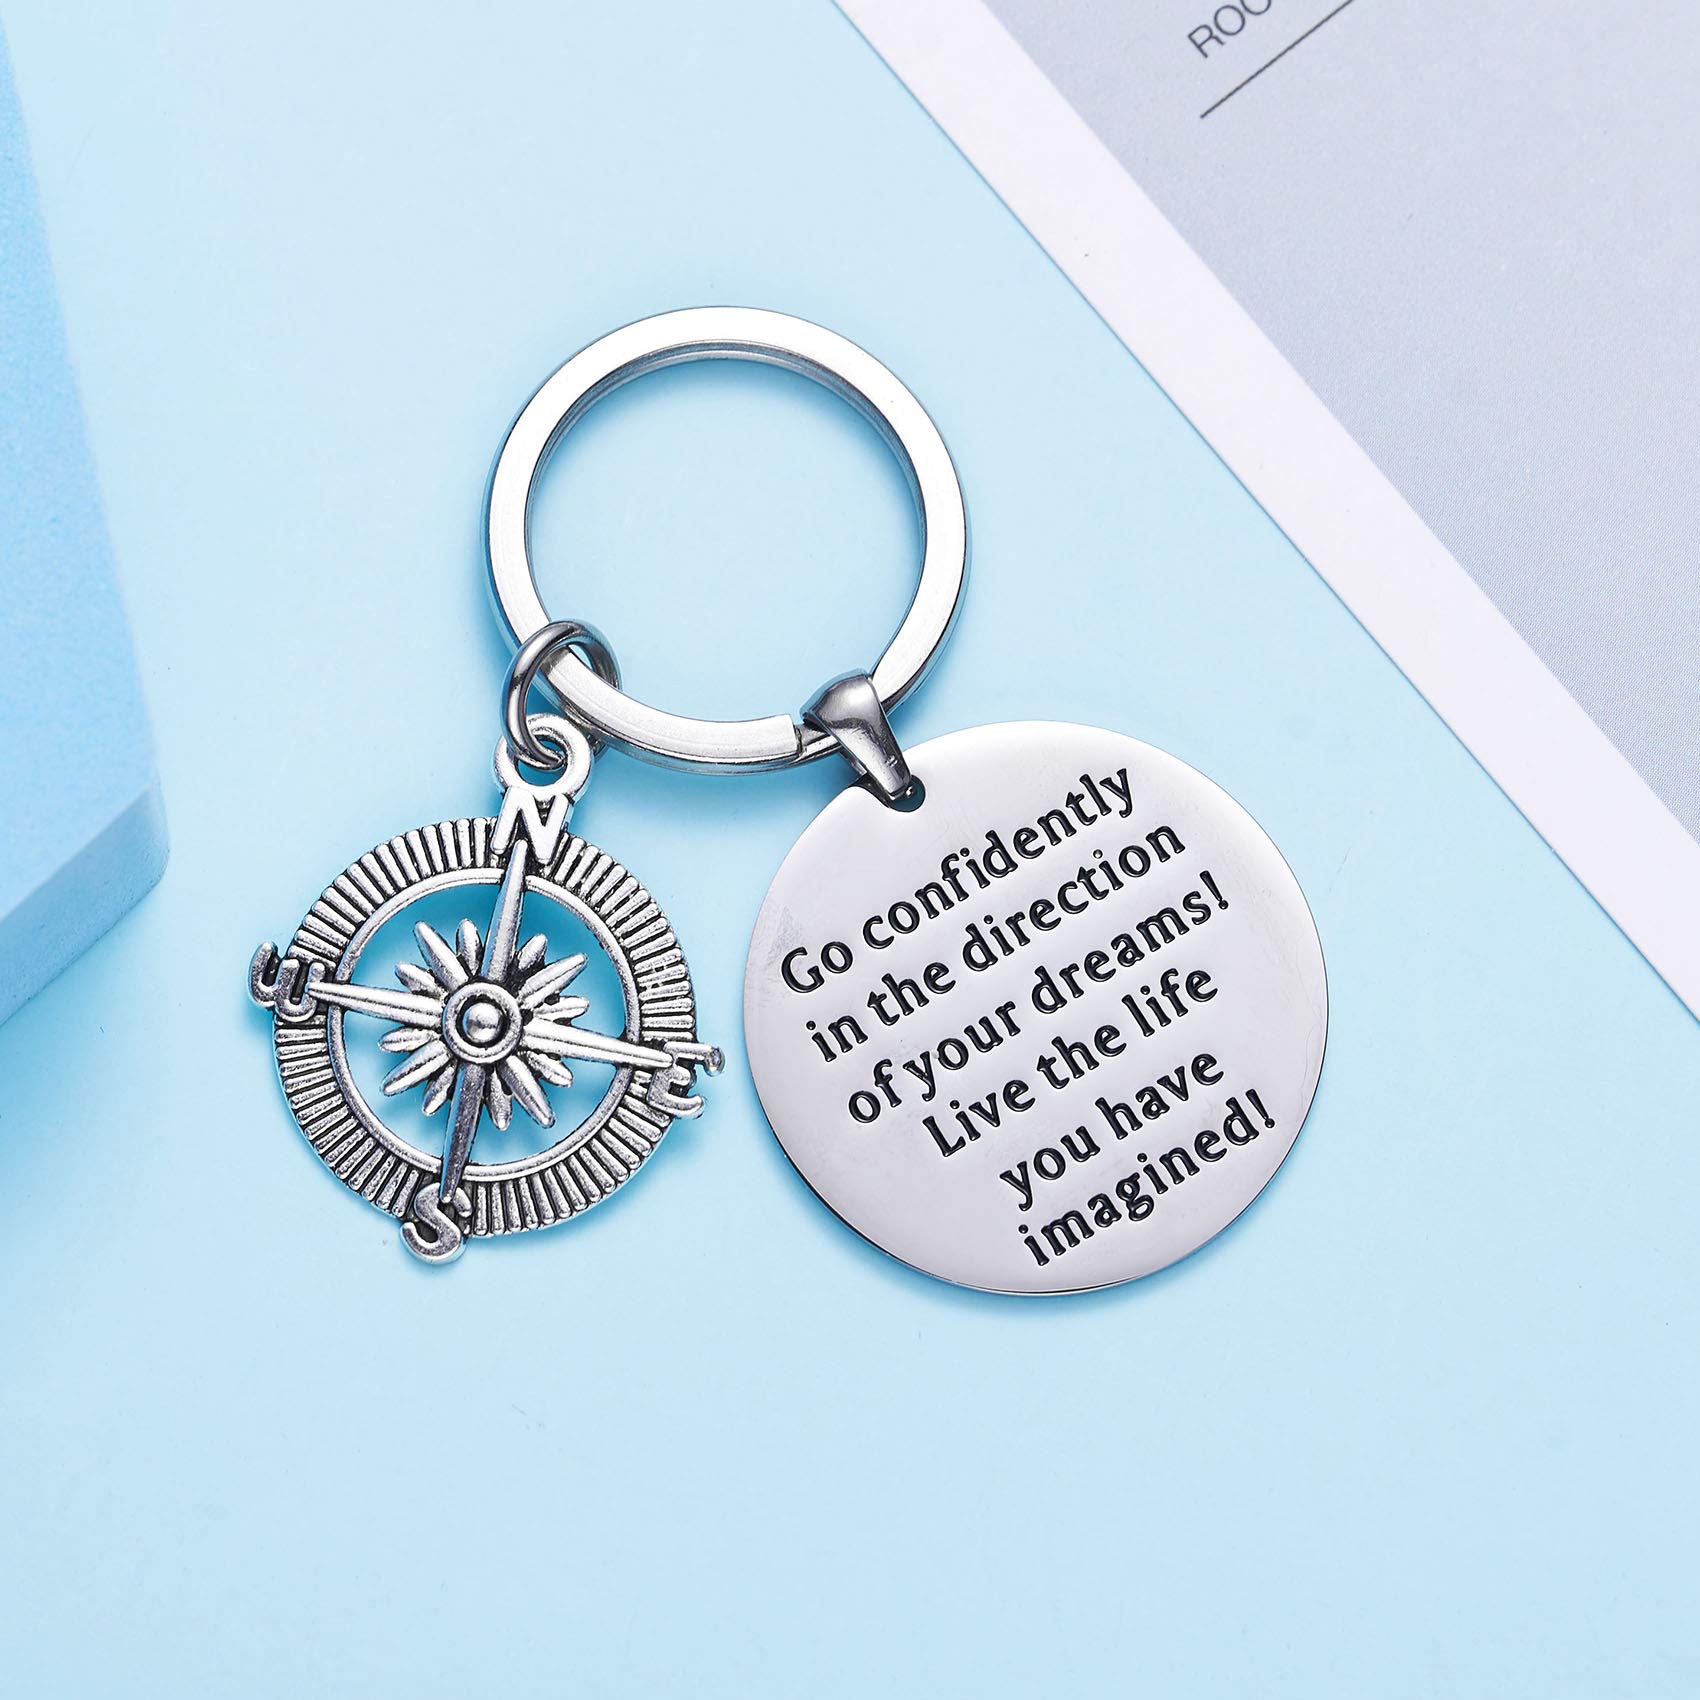 LParkin Graduation Gifts Keychains for Her Him 2022 Graduate Students Inspirational Gift